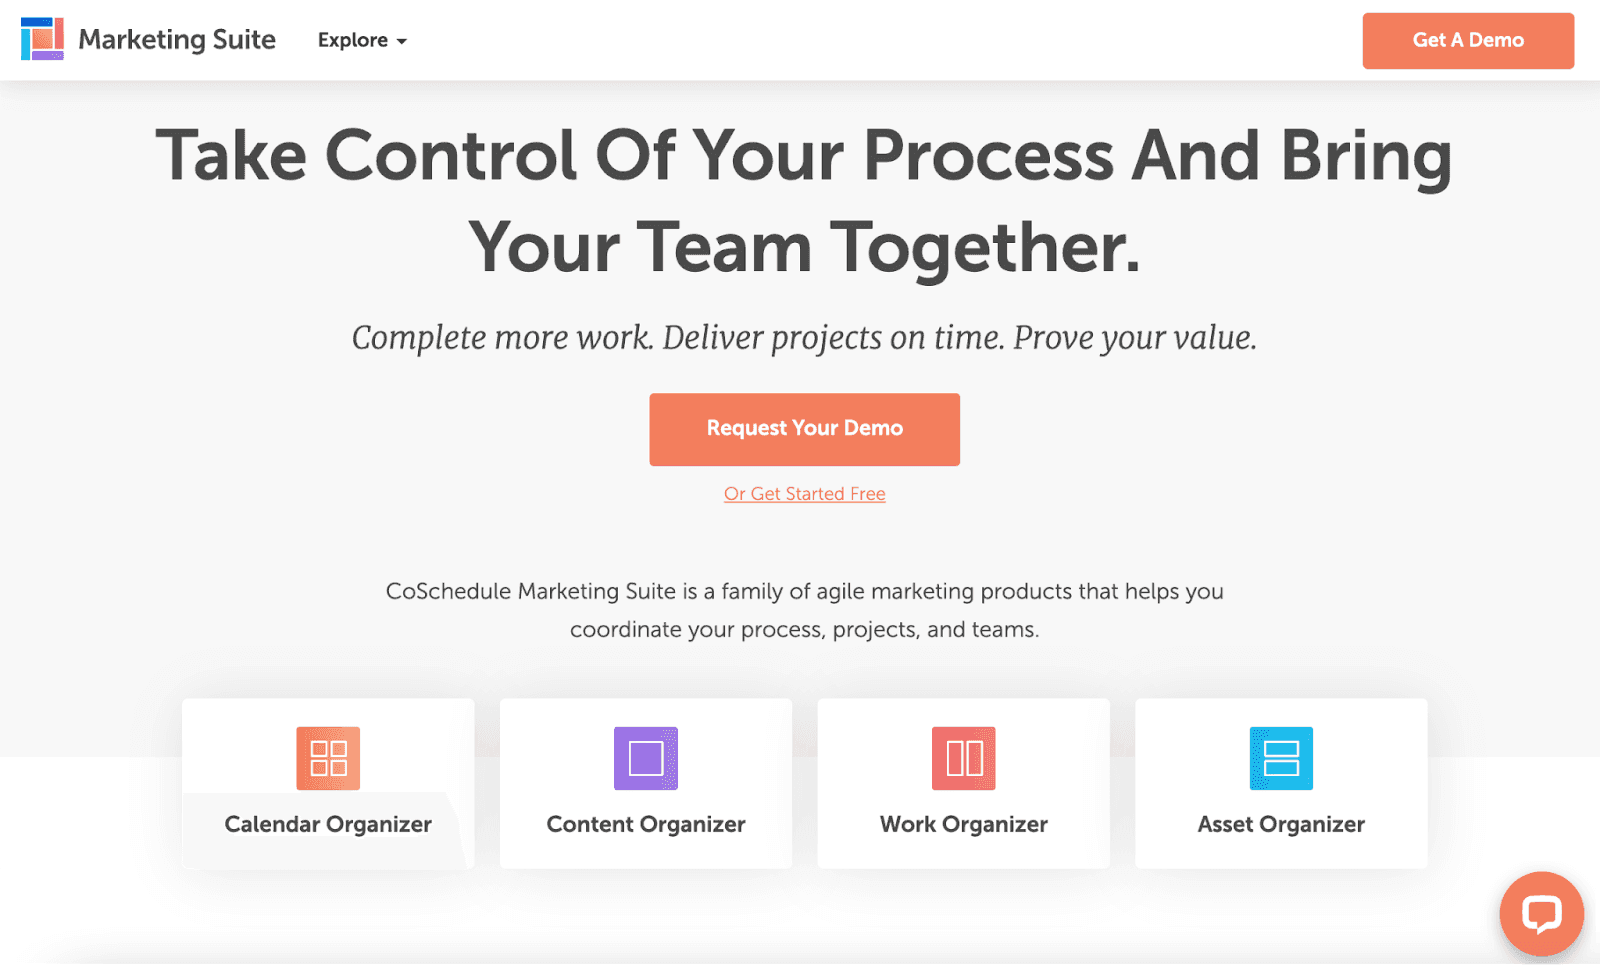 CoSchedule allows the customer to manage projects more efficiently and get more work done.